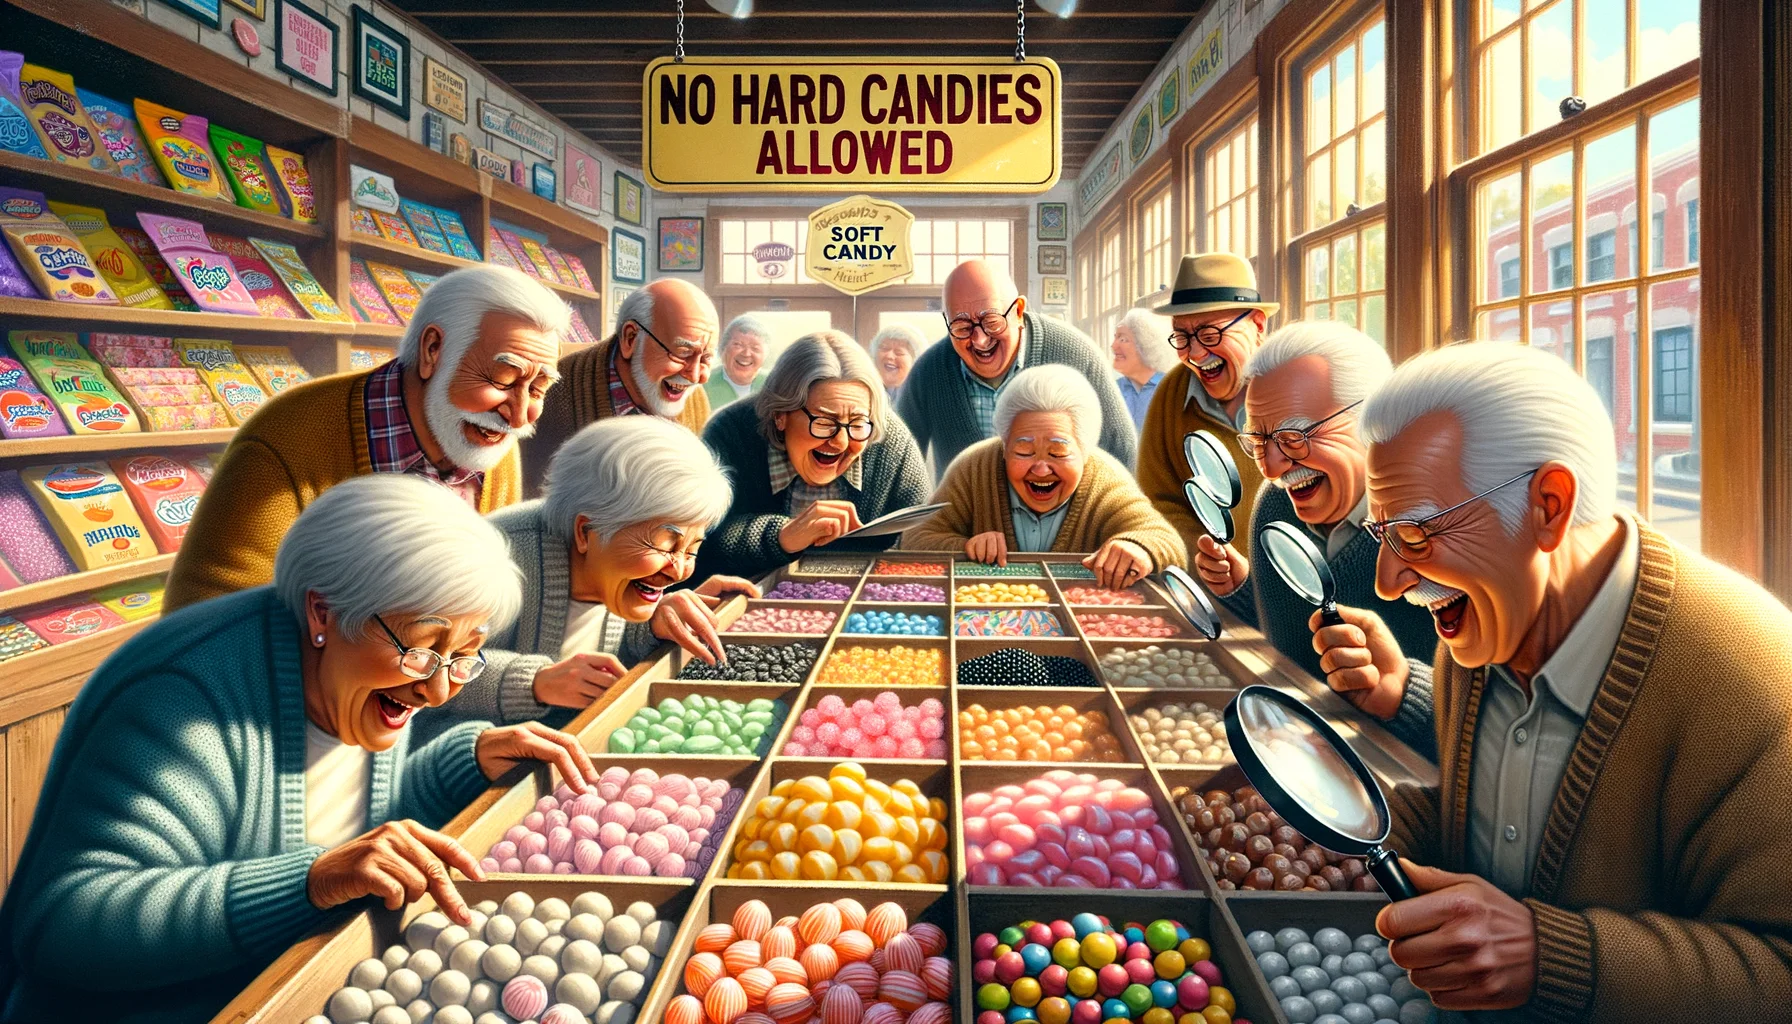 Create a humorous, realistic image showing a team of older individuals exploring a variety of soft candy options. The scene unfolds in a sunny, rustic candy store filled with vibrant colors. Shelves are laden with candies of all kinds, but the focus is on a dedicated section showcasing 'Elderly-Friendly Soft Candy Options.' Elderly people of various descents, such as Hispanic, Caucasian and Asian, marvel at the selection, some laughing while holding magnifying glasses to read ingredients, others carefully squishing candies to test their softness. A sign humorously displays 'No hard candies allowed' to emphasize the soft candy selection.